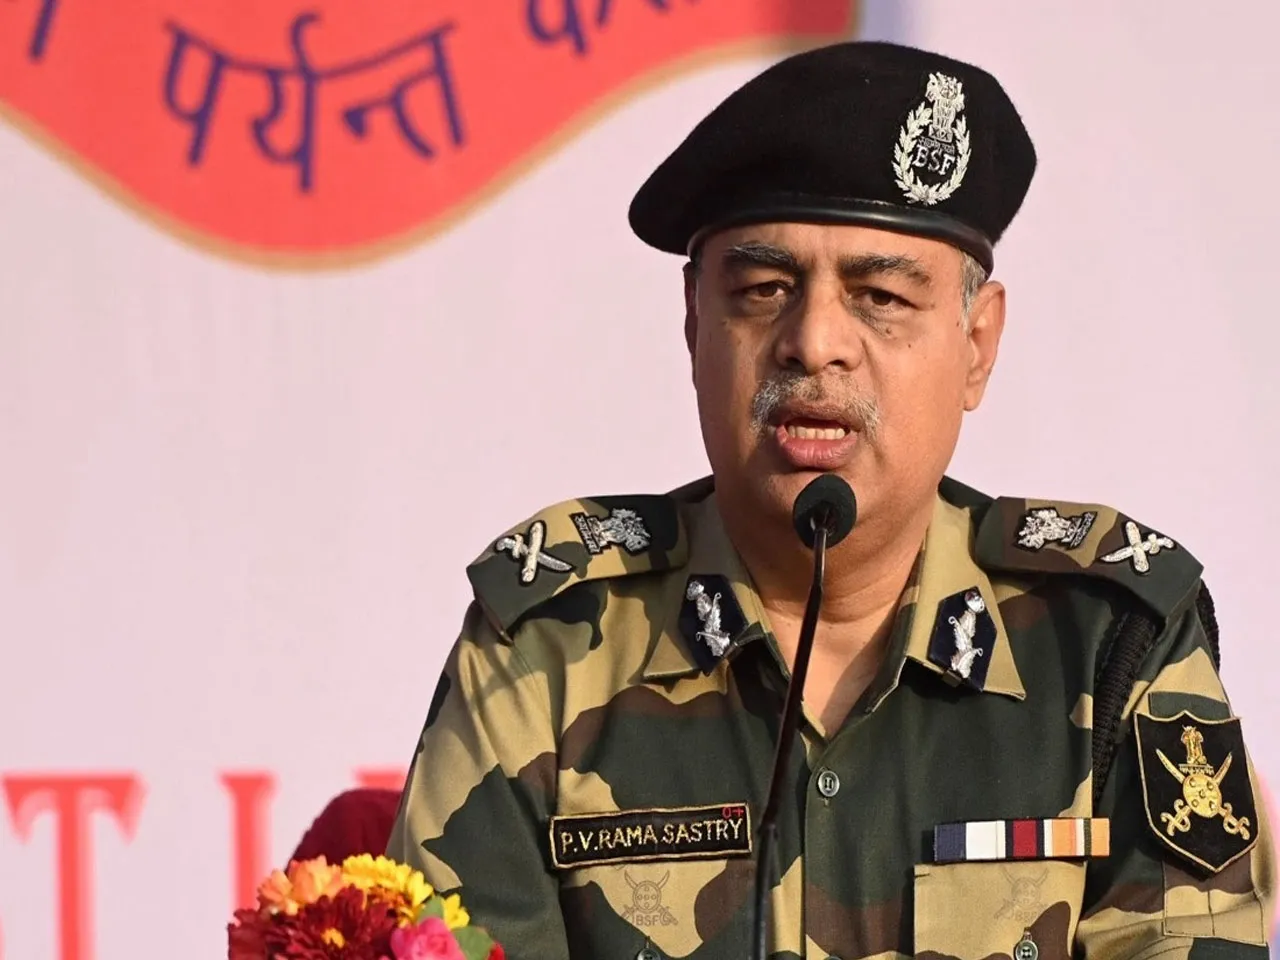 PV Ramasastry to head either BCAS or CISF?